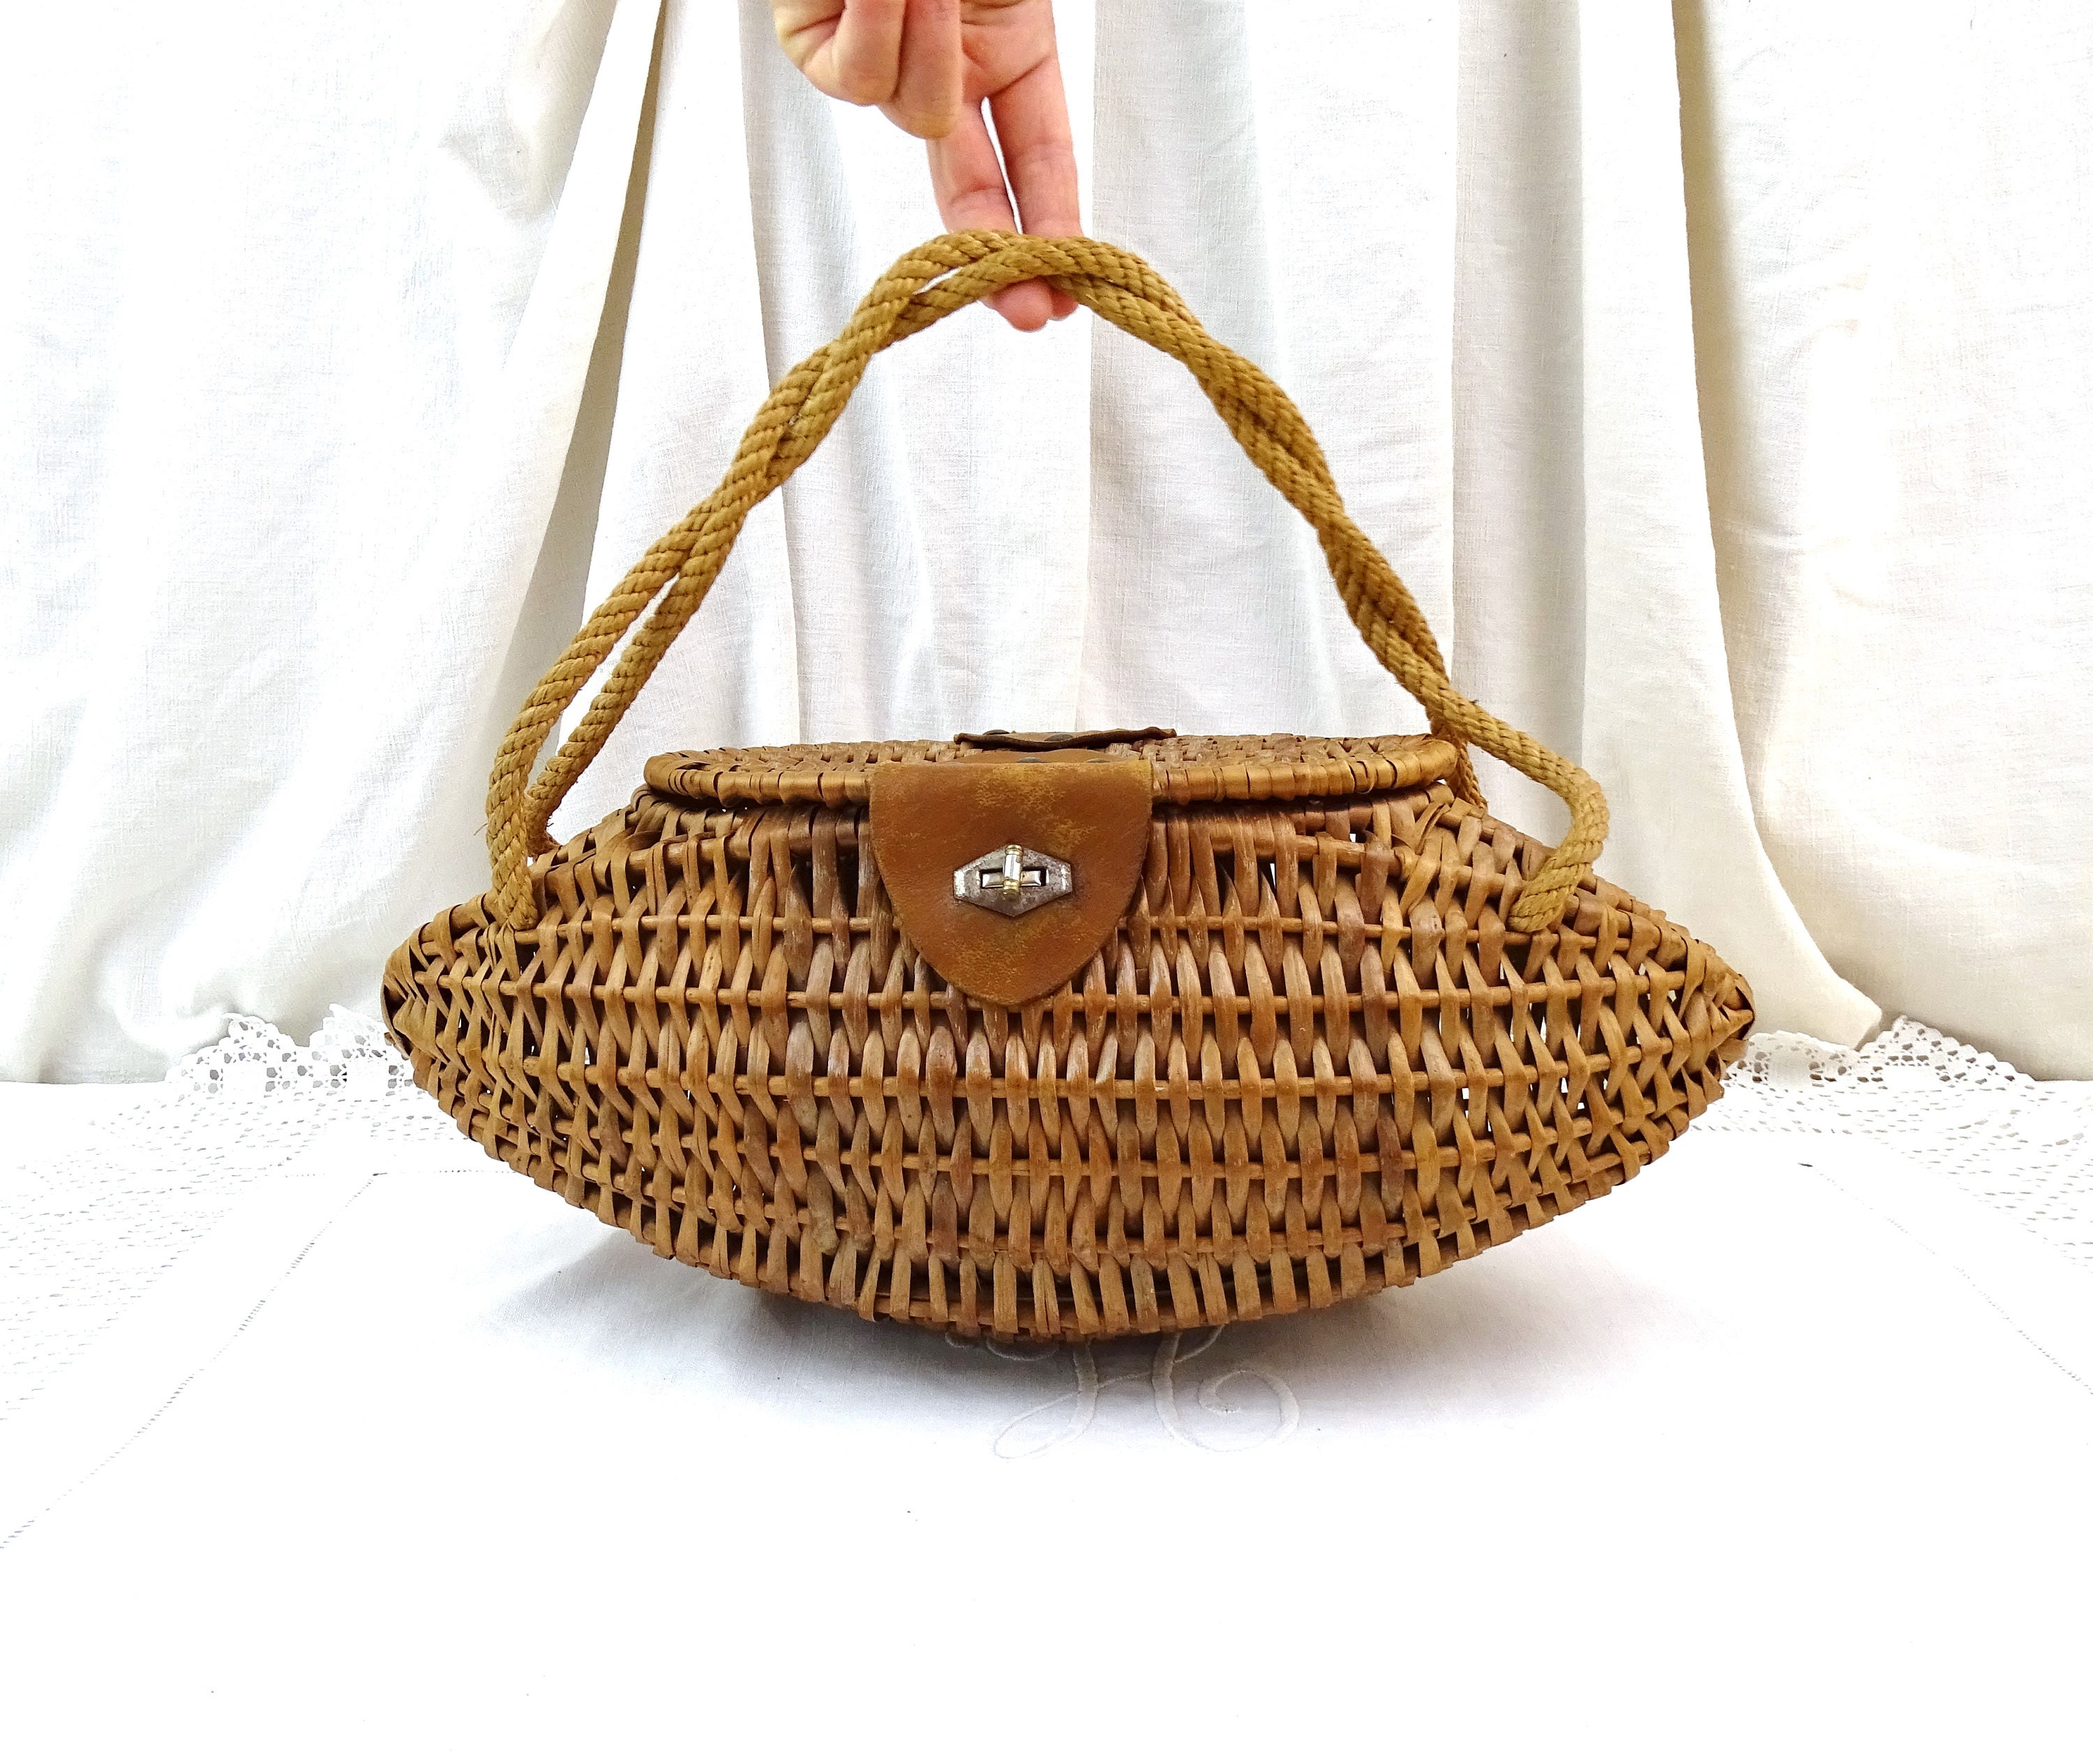 Antique French Oval Shaped Woven Wicker Fish Basket with Rope Handle and  Leather Hinges, Retro Unusual Decorative Container from France